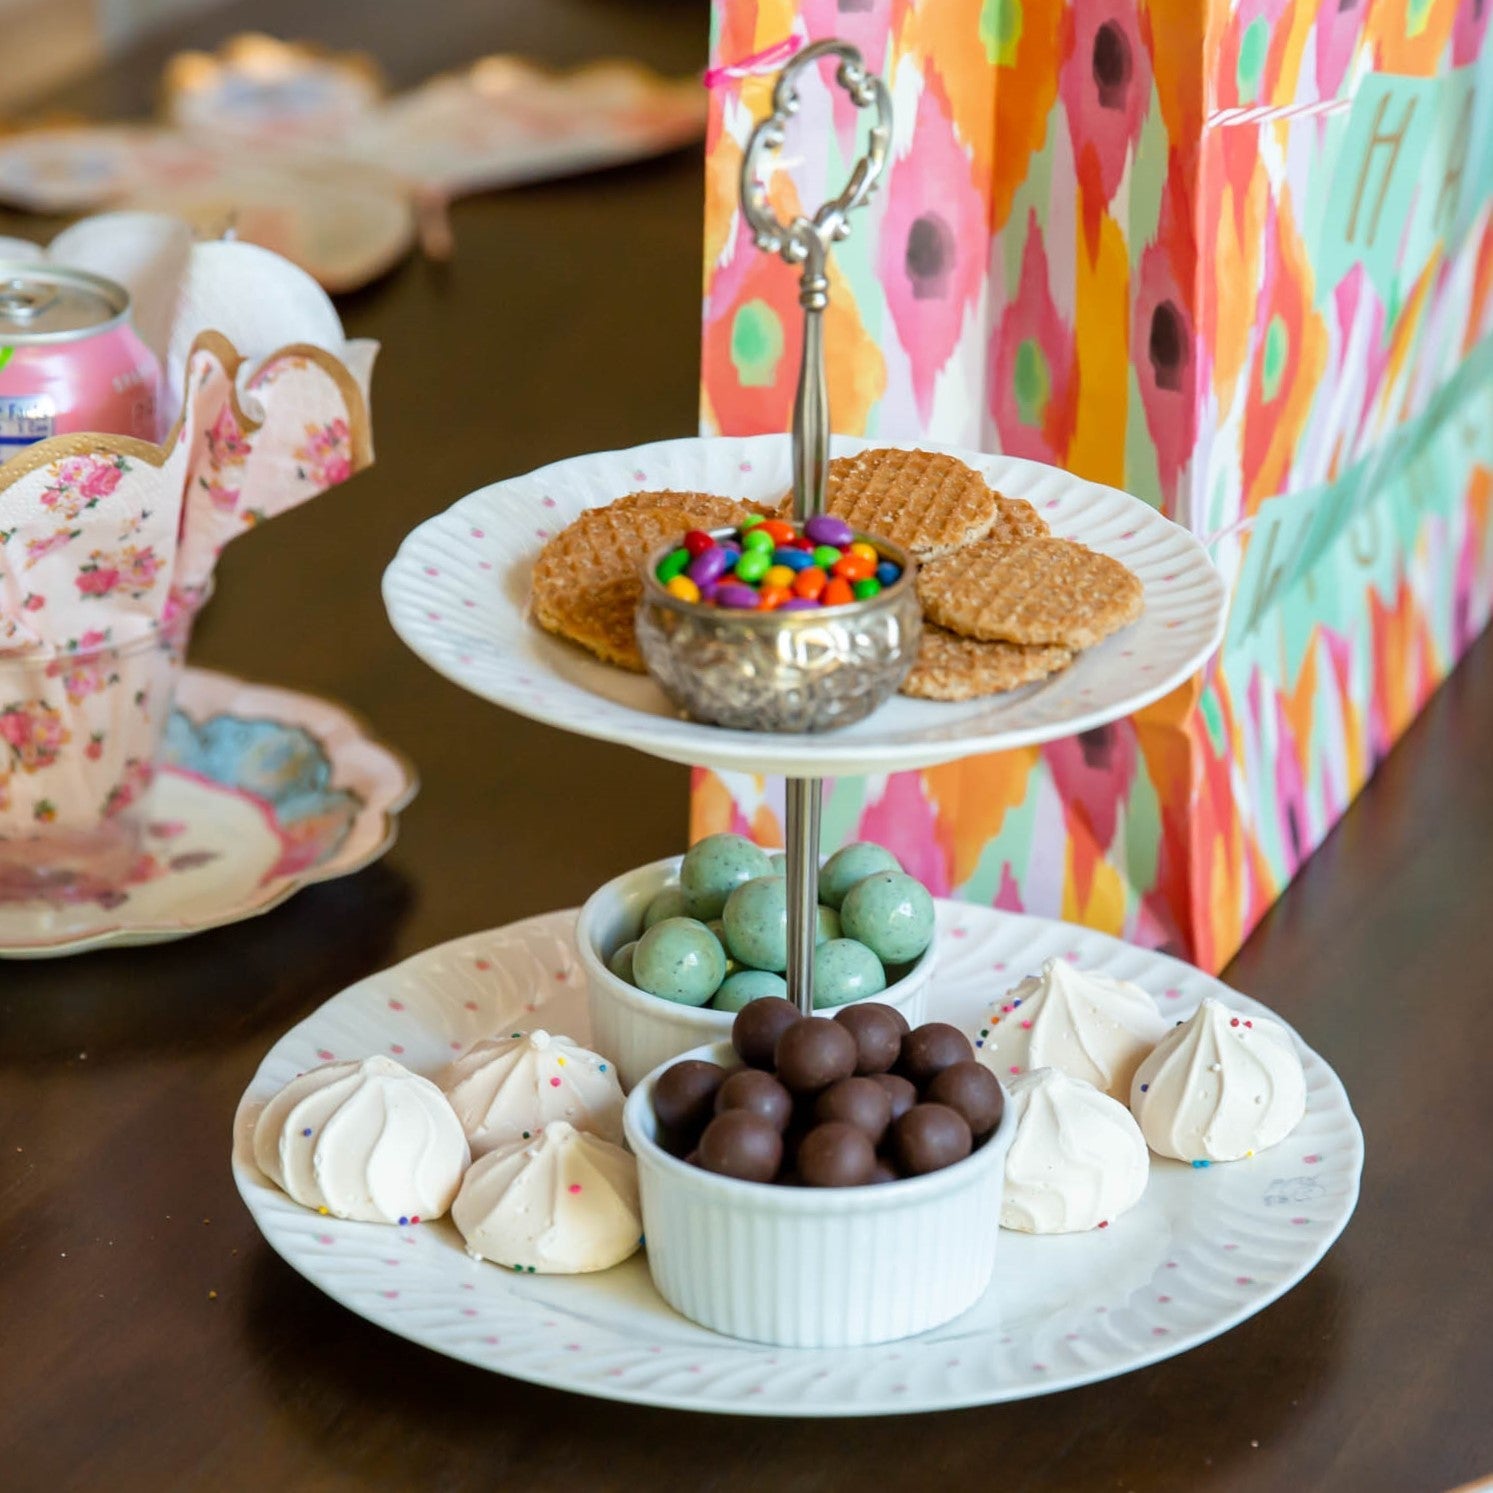 Upcycled serving tray made from old china plates - 2 Tier Tray used to deserve desserts at a birthday party